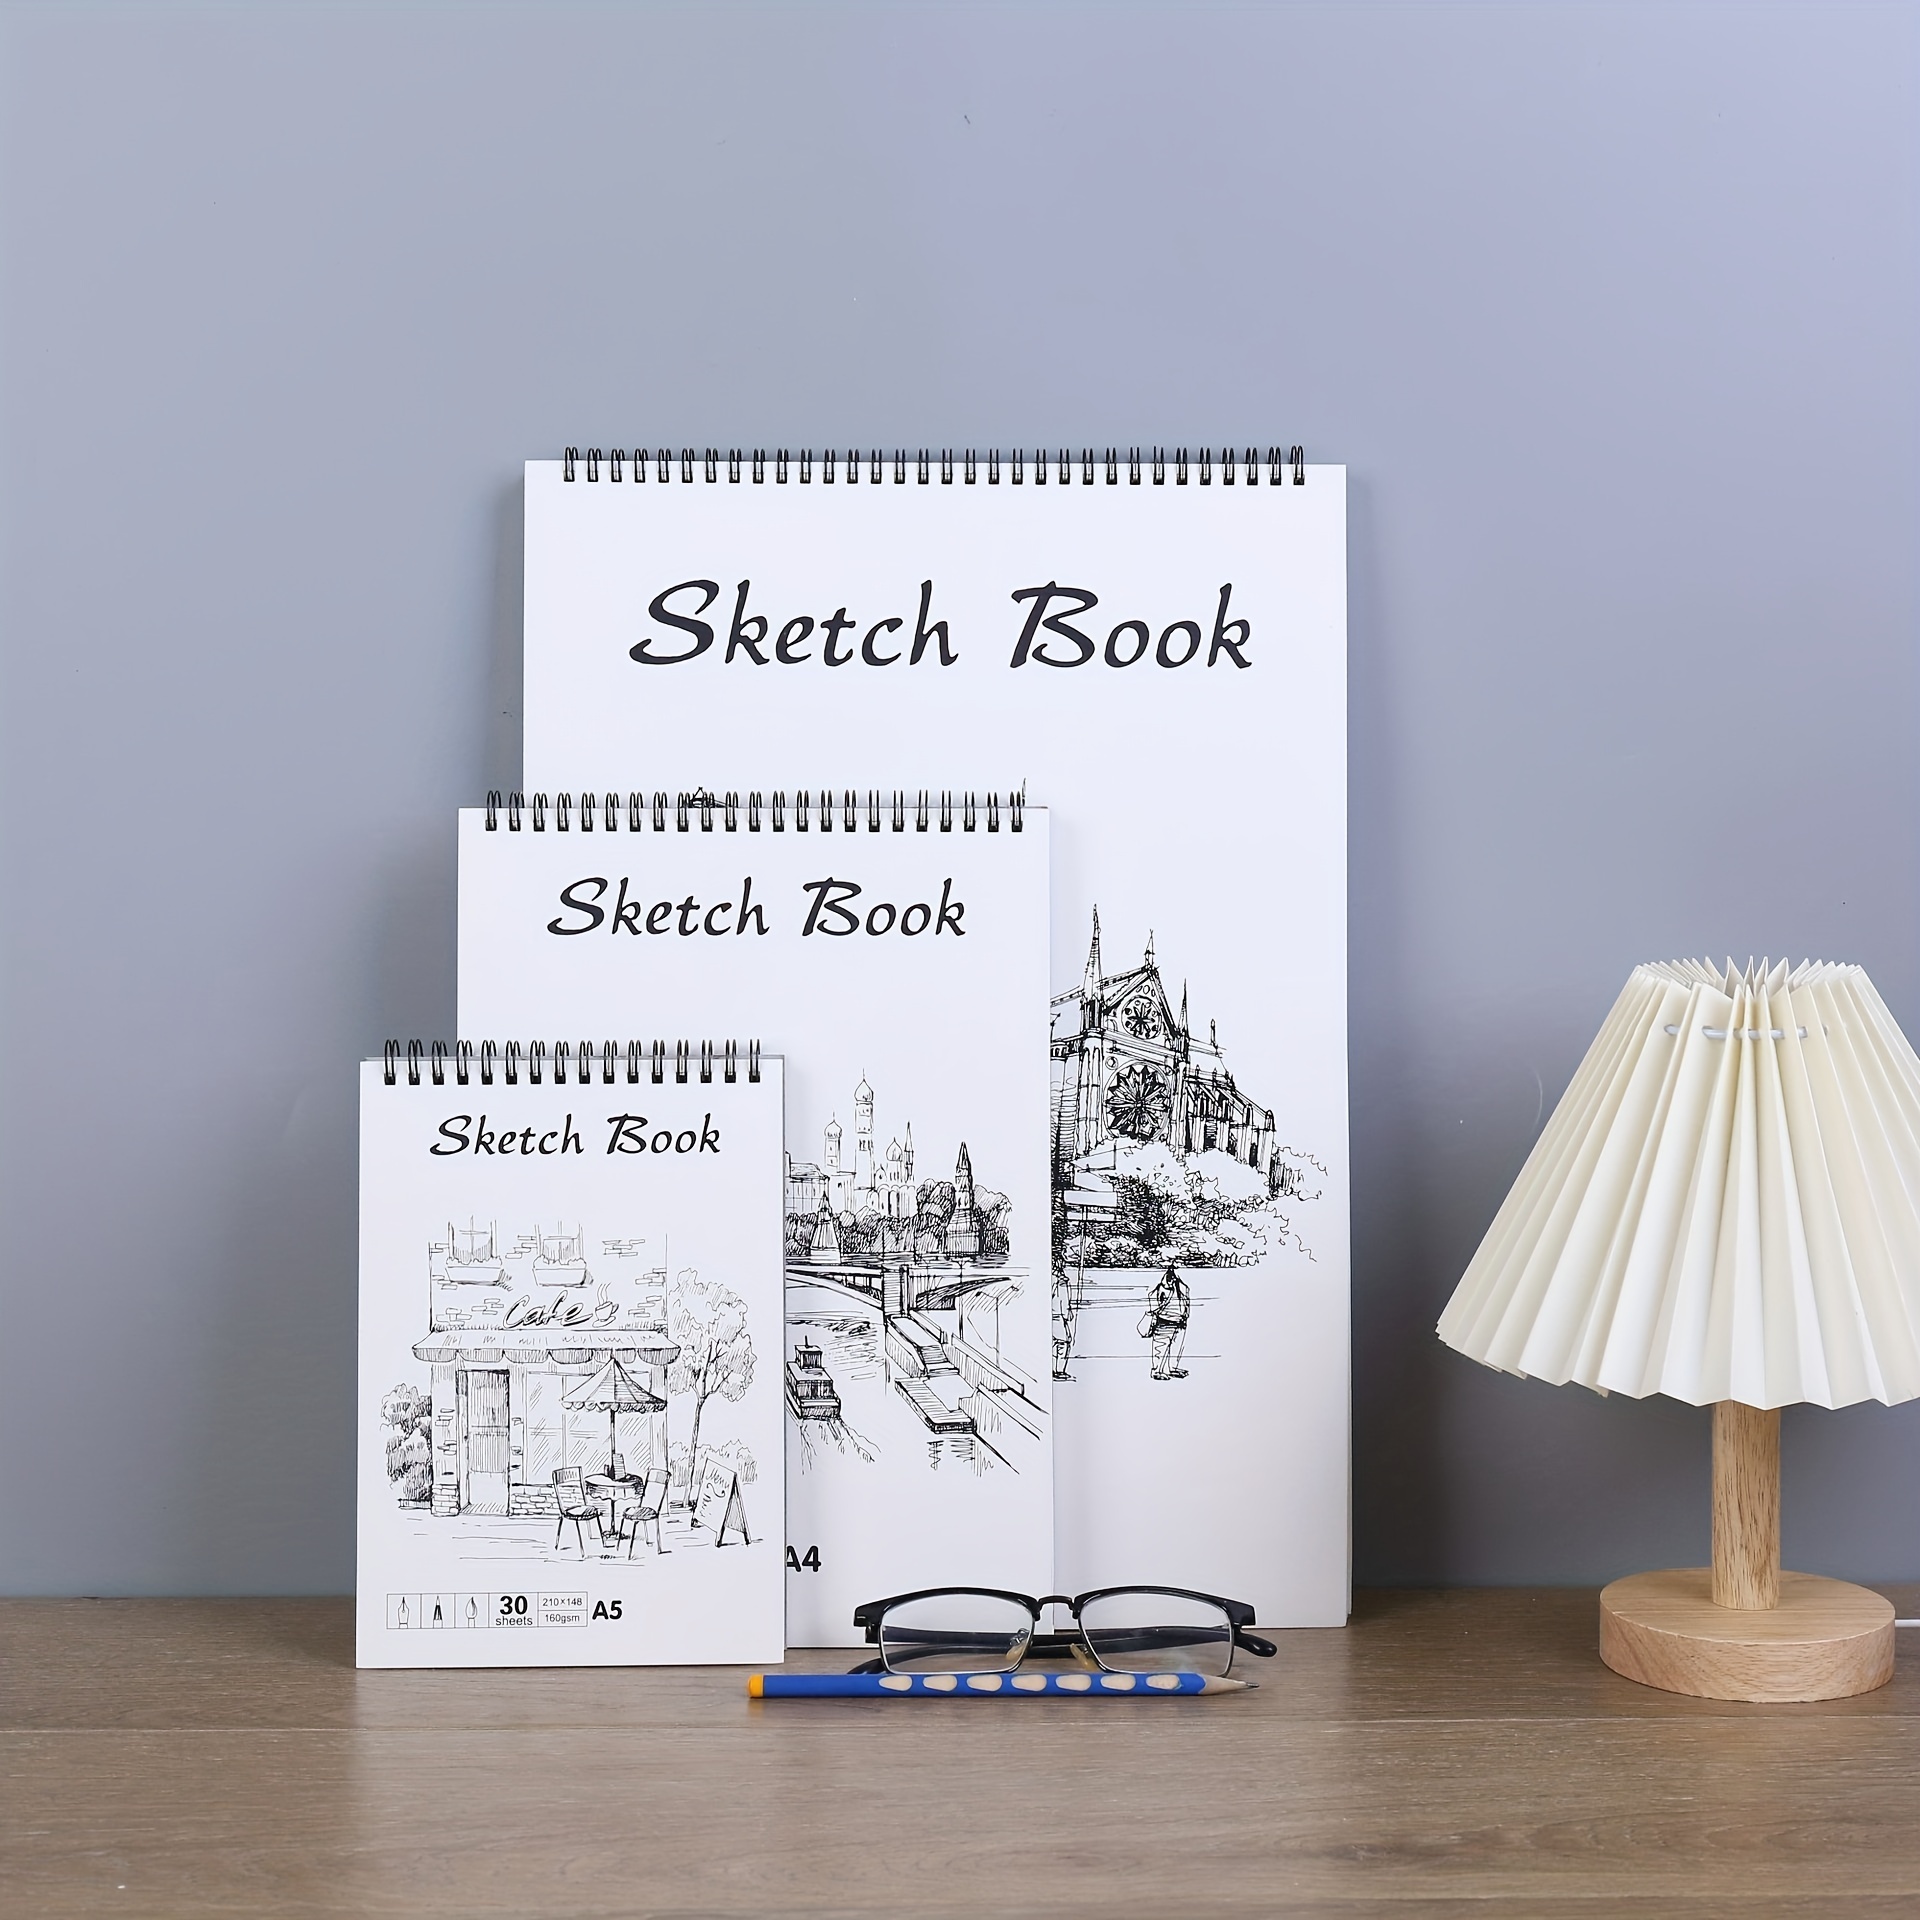 My Sketchbook - Kids Sketchbook - 120 Plain Paper Pages For Drawing -  Writing - Doodle - Creative Drawing - Kids Gift Idea